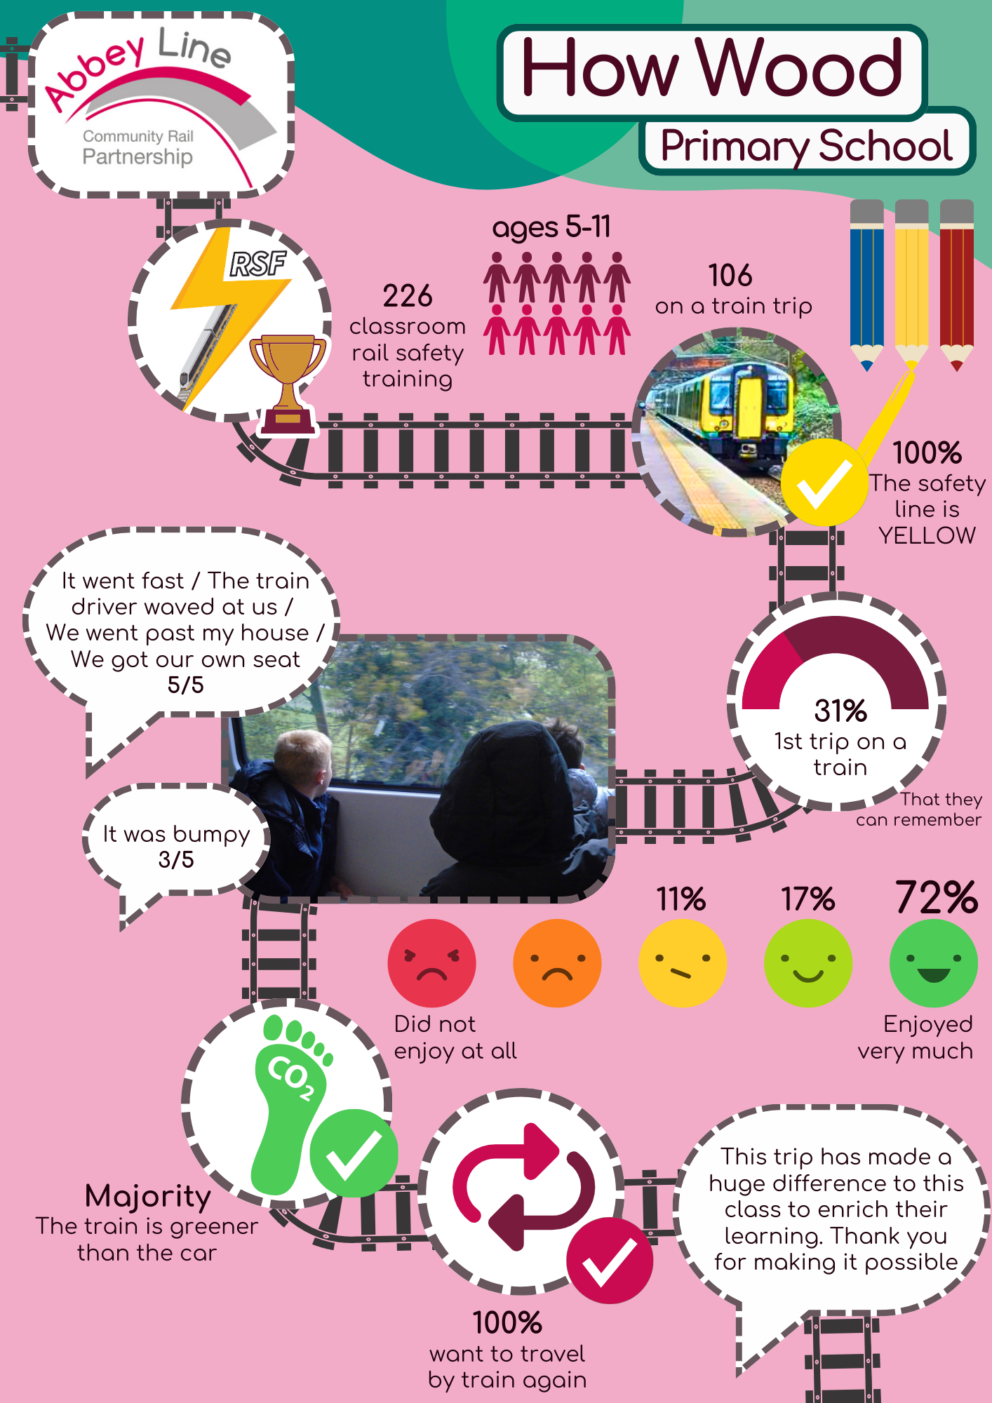 Infographic showing facts and figures about primary school engagement with their community rail partnership